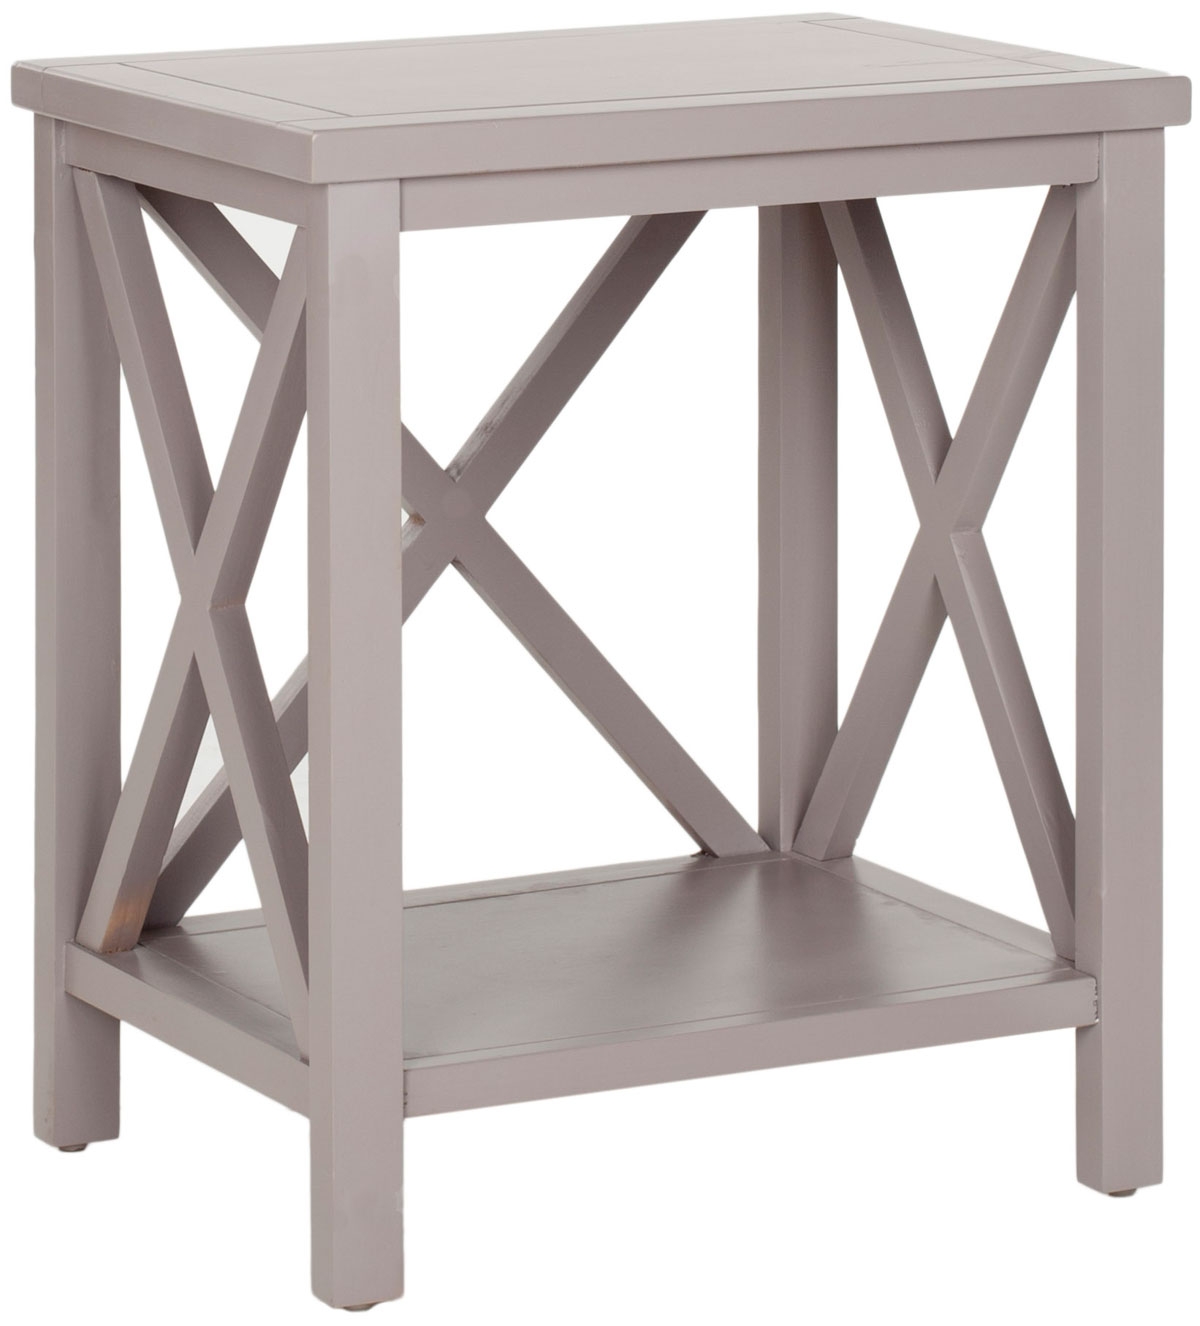 Candence Cross Back End Table - Quartz Grey - Arlo Home - Image 2